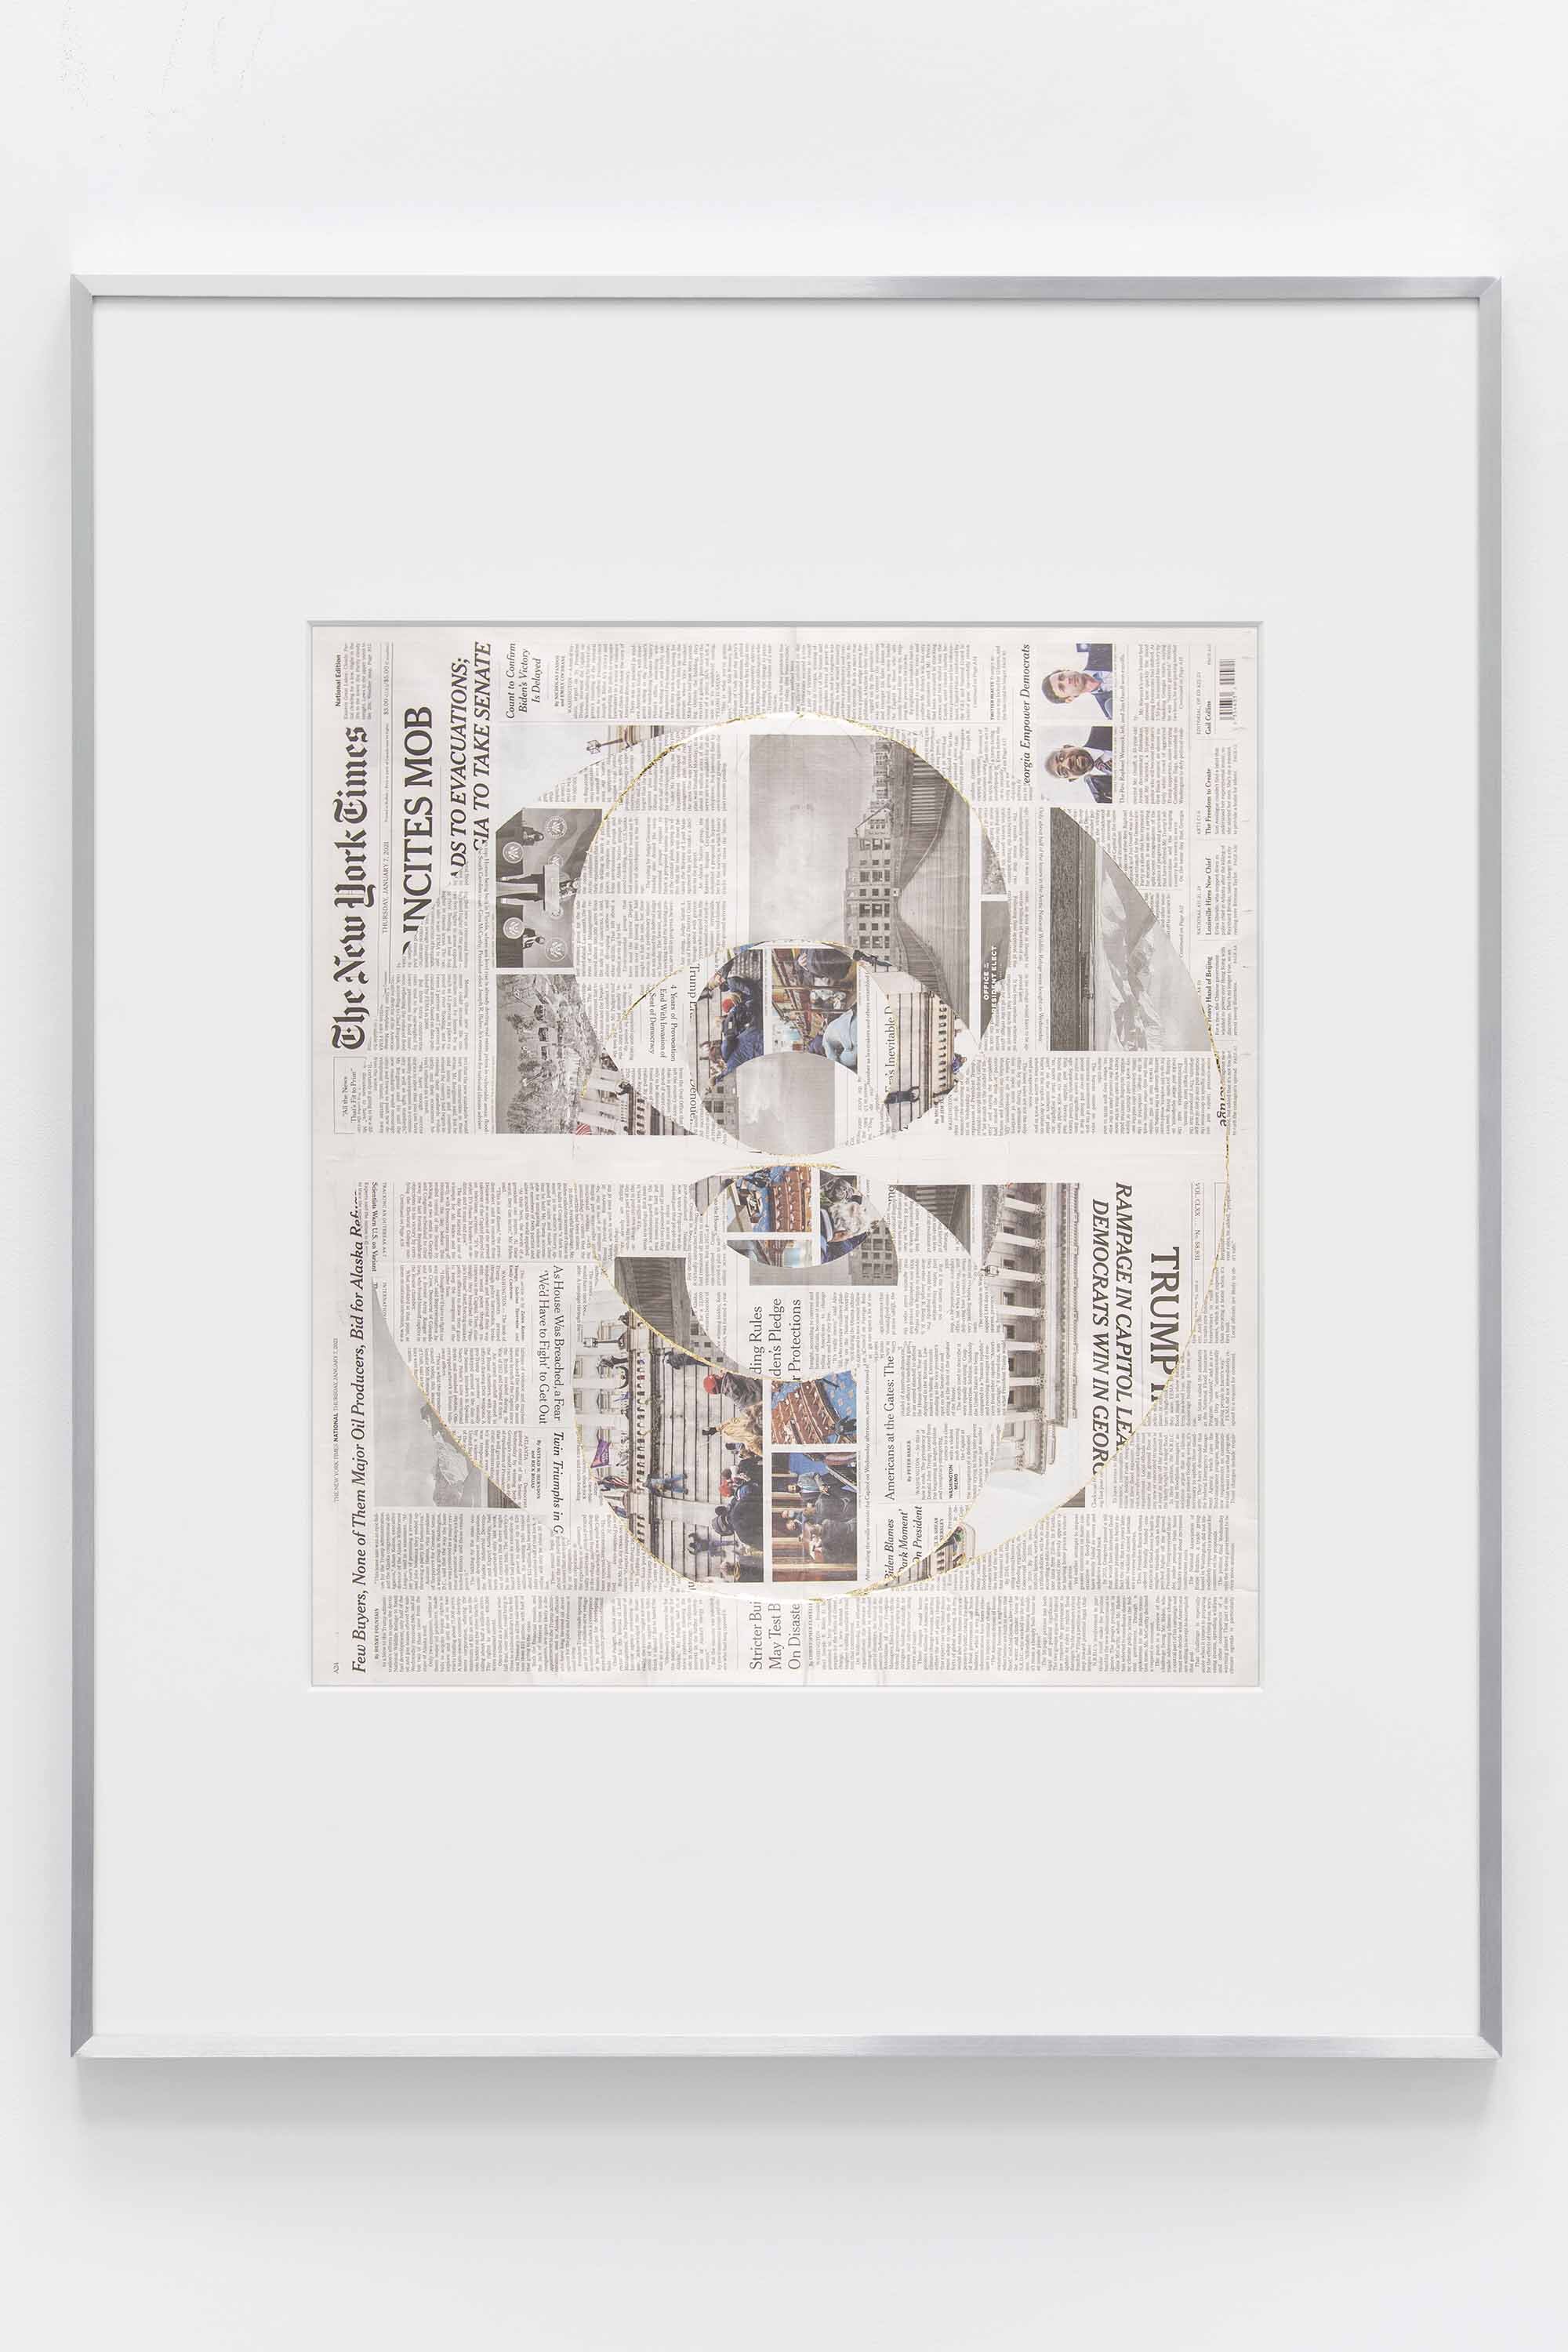   Blind Collage (Seven 180º Rotations, The New York Times: Buffalo, New York, Thursday, January 7, 2021)   2021  Newspaper, tape, and 22 karat gold leaf  39 1/8 x 31 1/4 inches   Blind Collages, 2017–   Exhibition:   Foreign Correspondence, 2021  